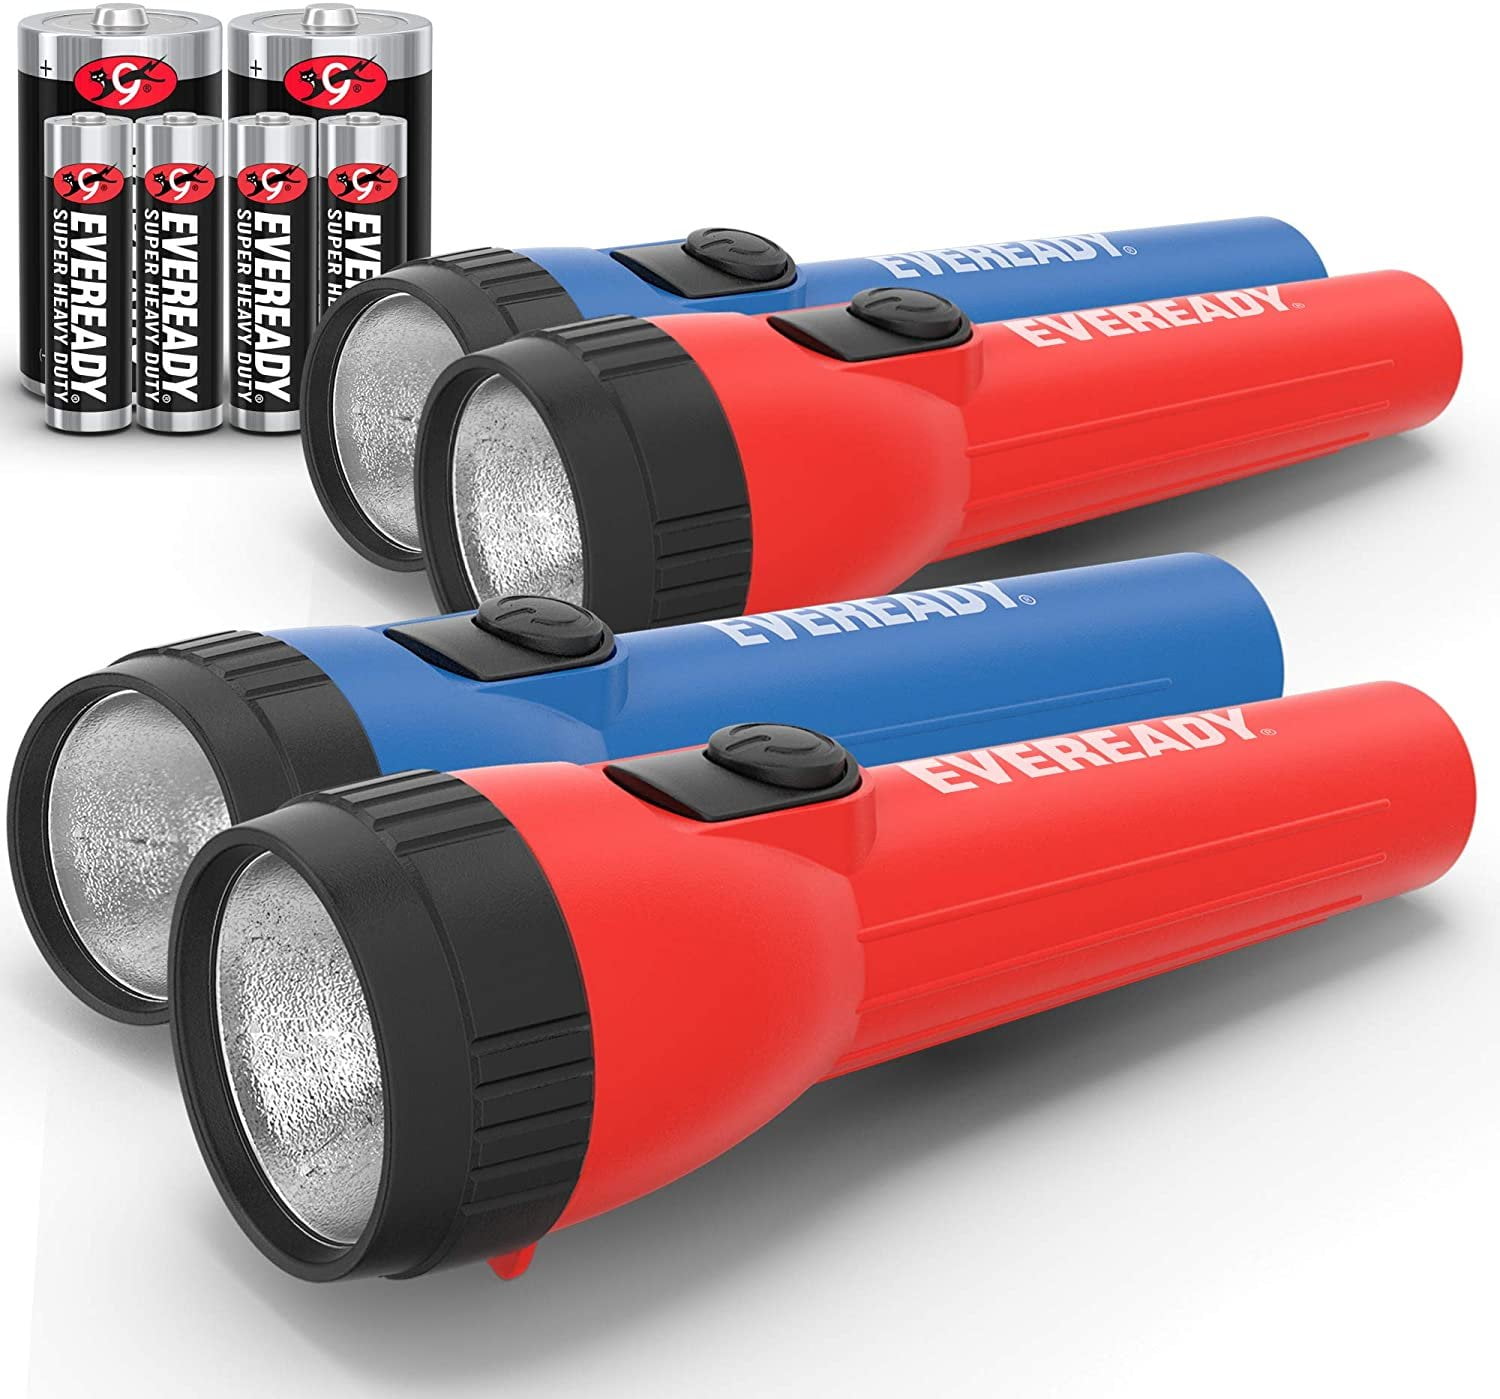 Batteries Included High Lumens Eveready LED Flashlight Multi-Pack 